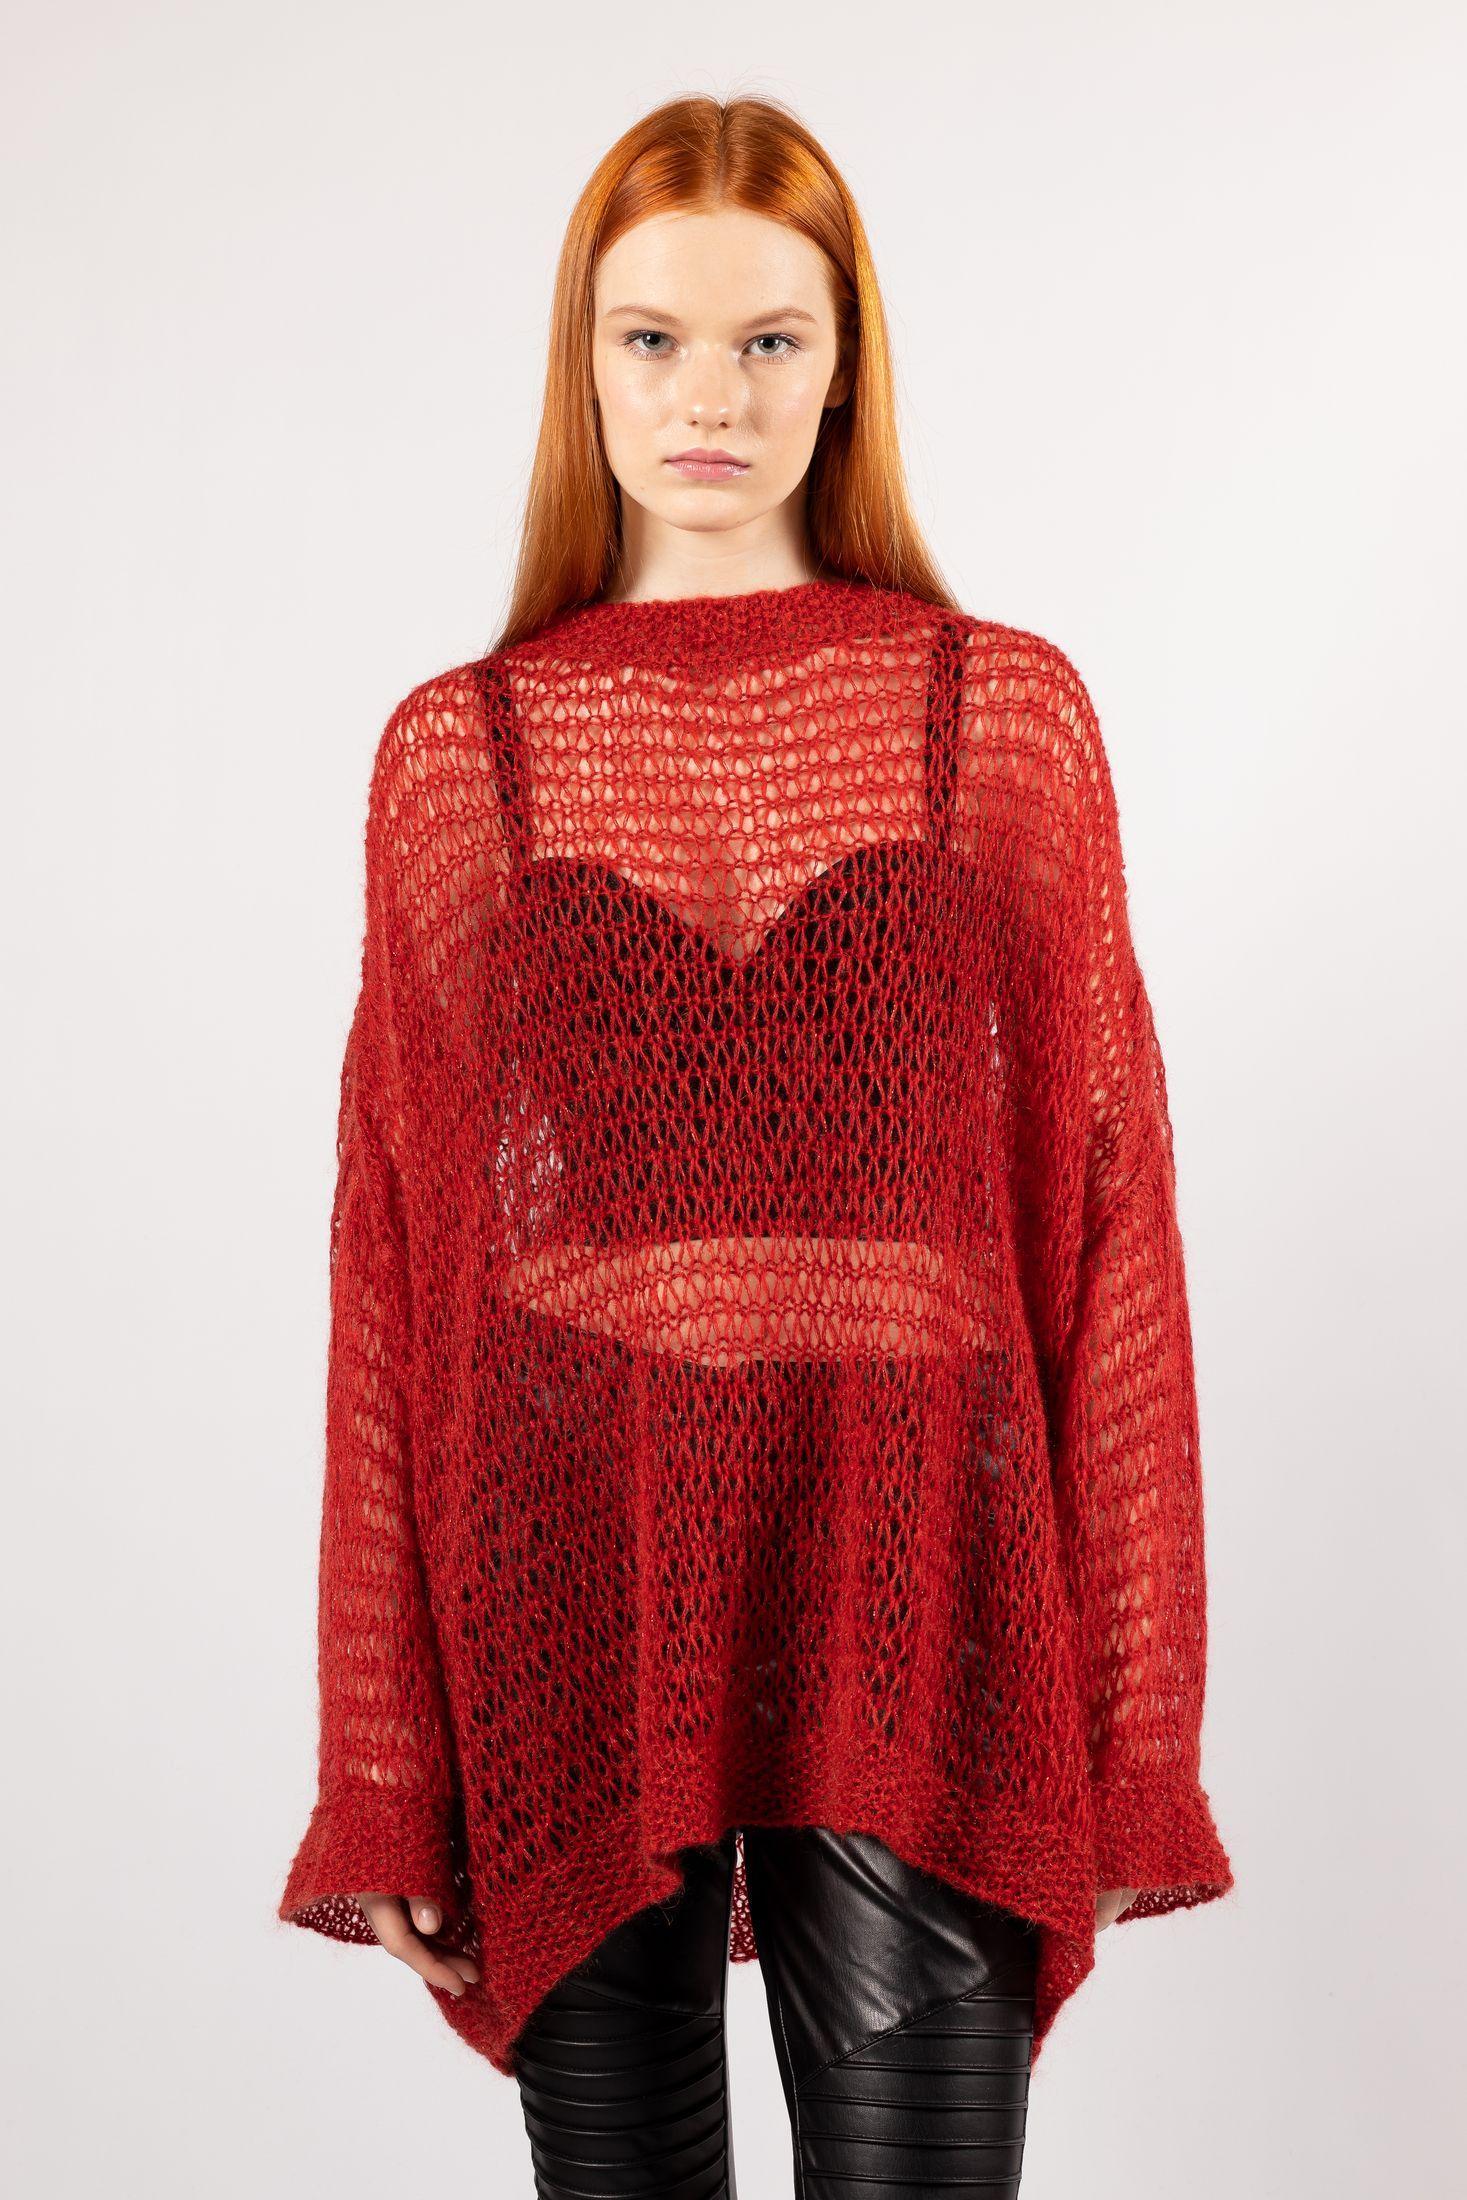 Fashion-forward IDA red mohair sweater featuring an open-loop hand-knit design for a cozy yet chic look